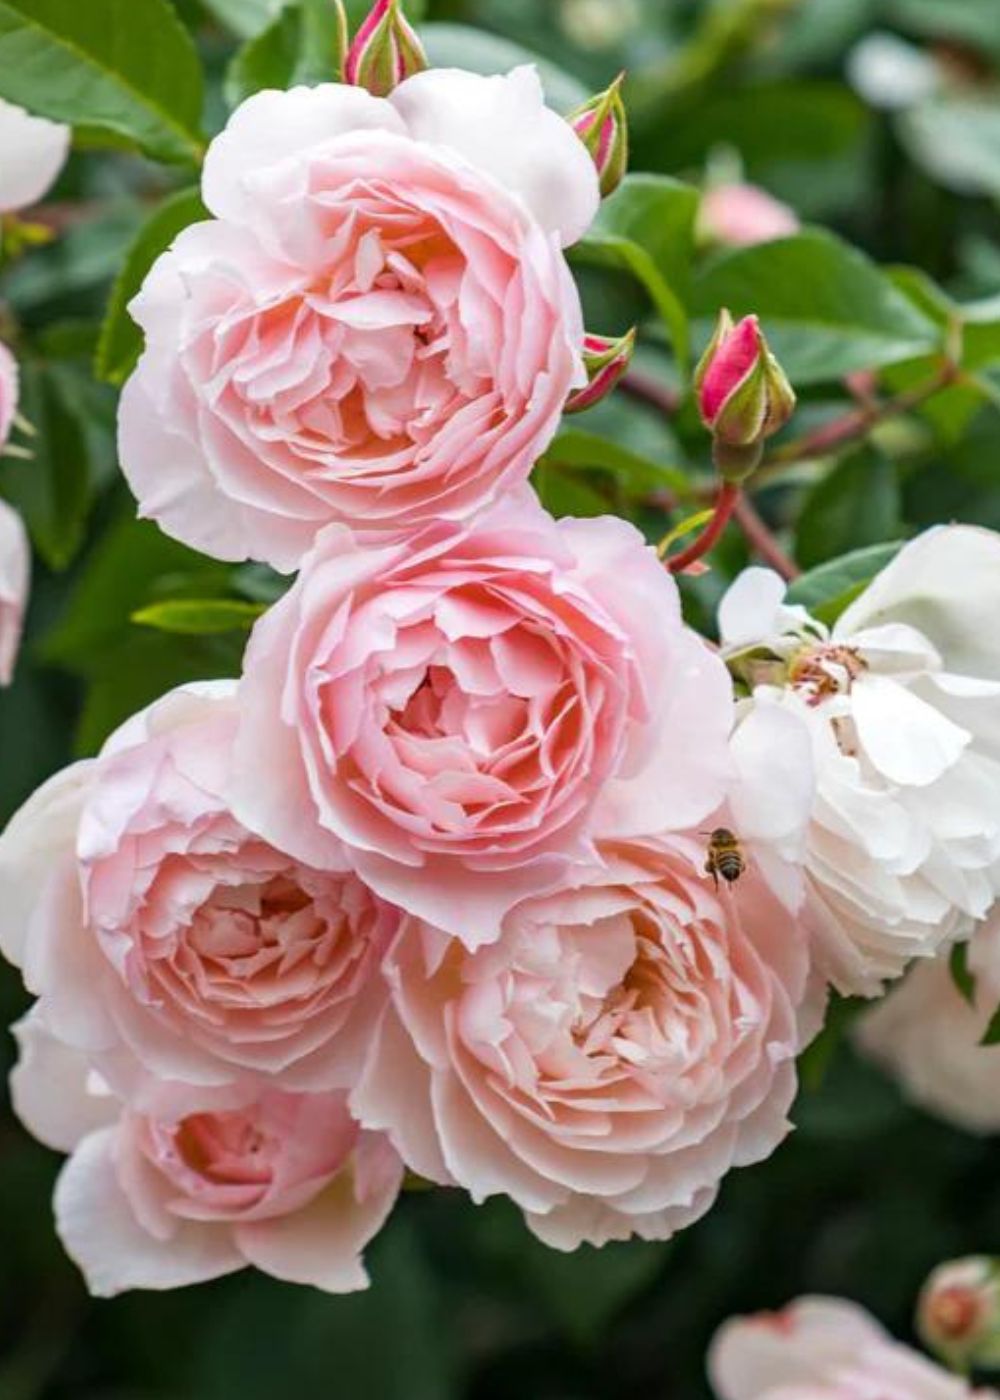 Bare Root Roses That Are English - Climber & Shrub Garden Roses